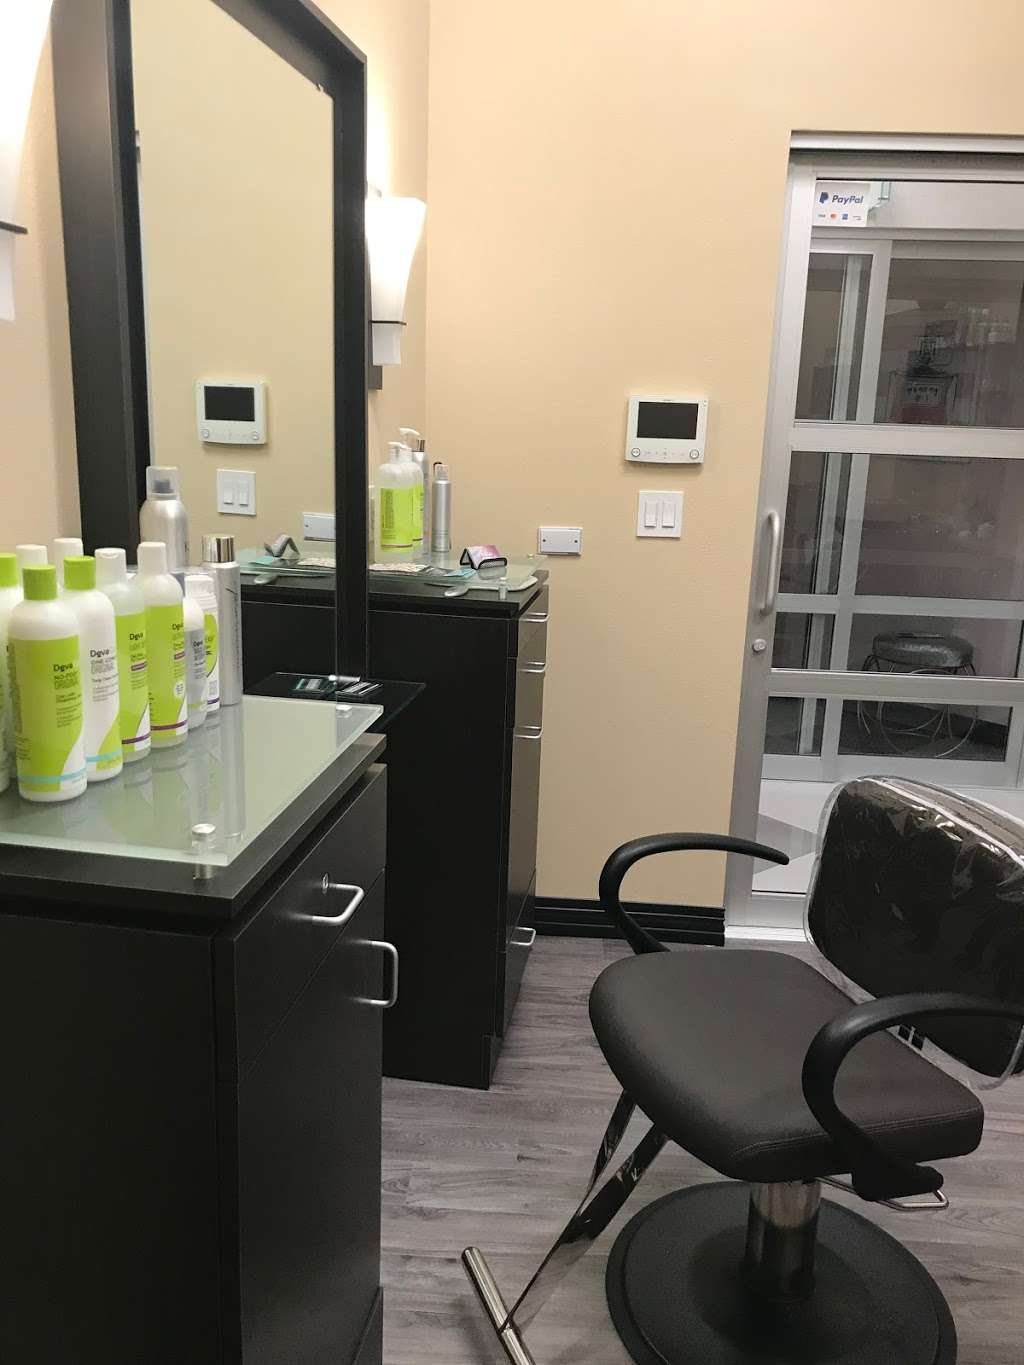 C.A. Macis Hair Studio - My Salon Suite of Highland on Main | 2715 Main Street unit d, Suite 204, Highland, IN 46322 | Phone: (219) 779-3437